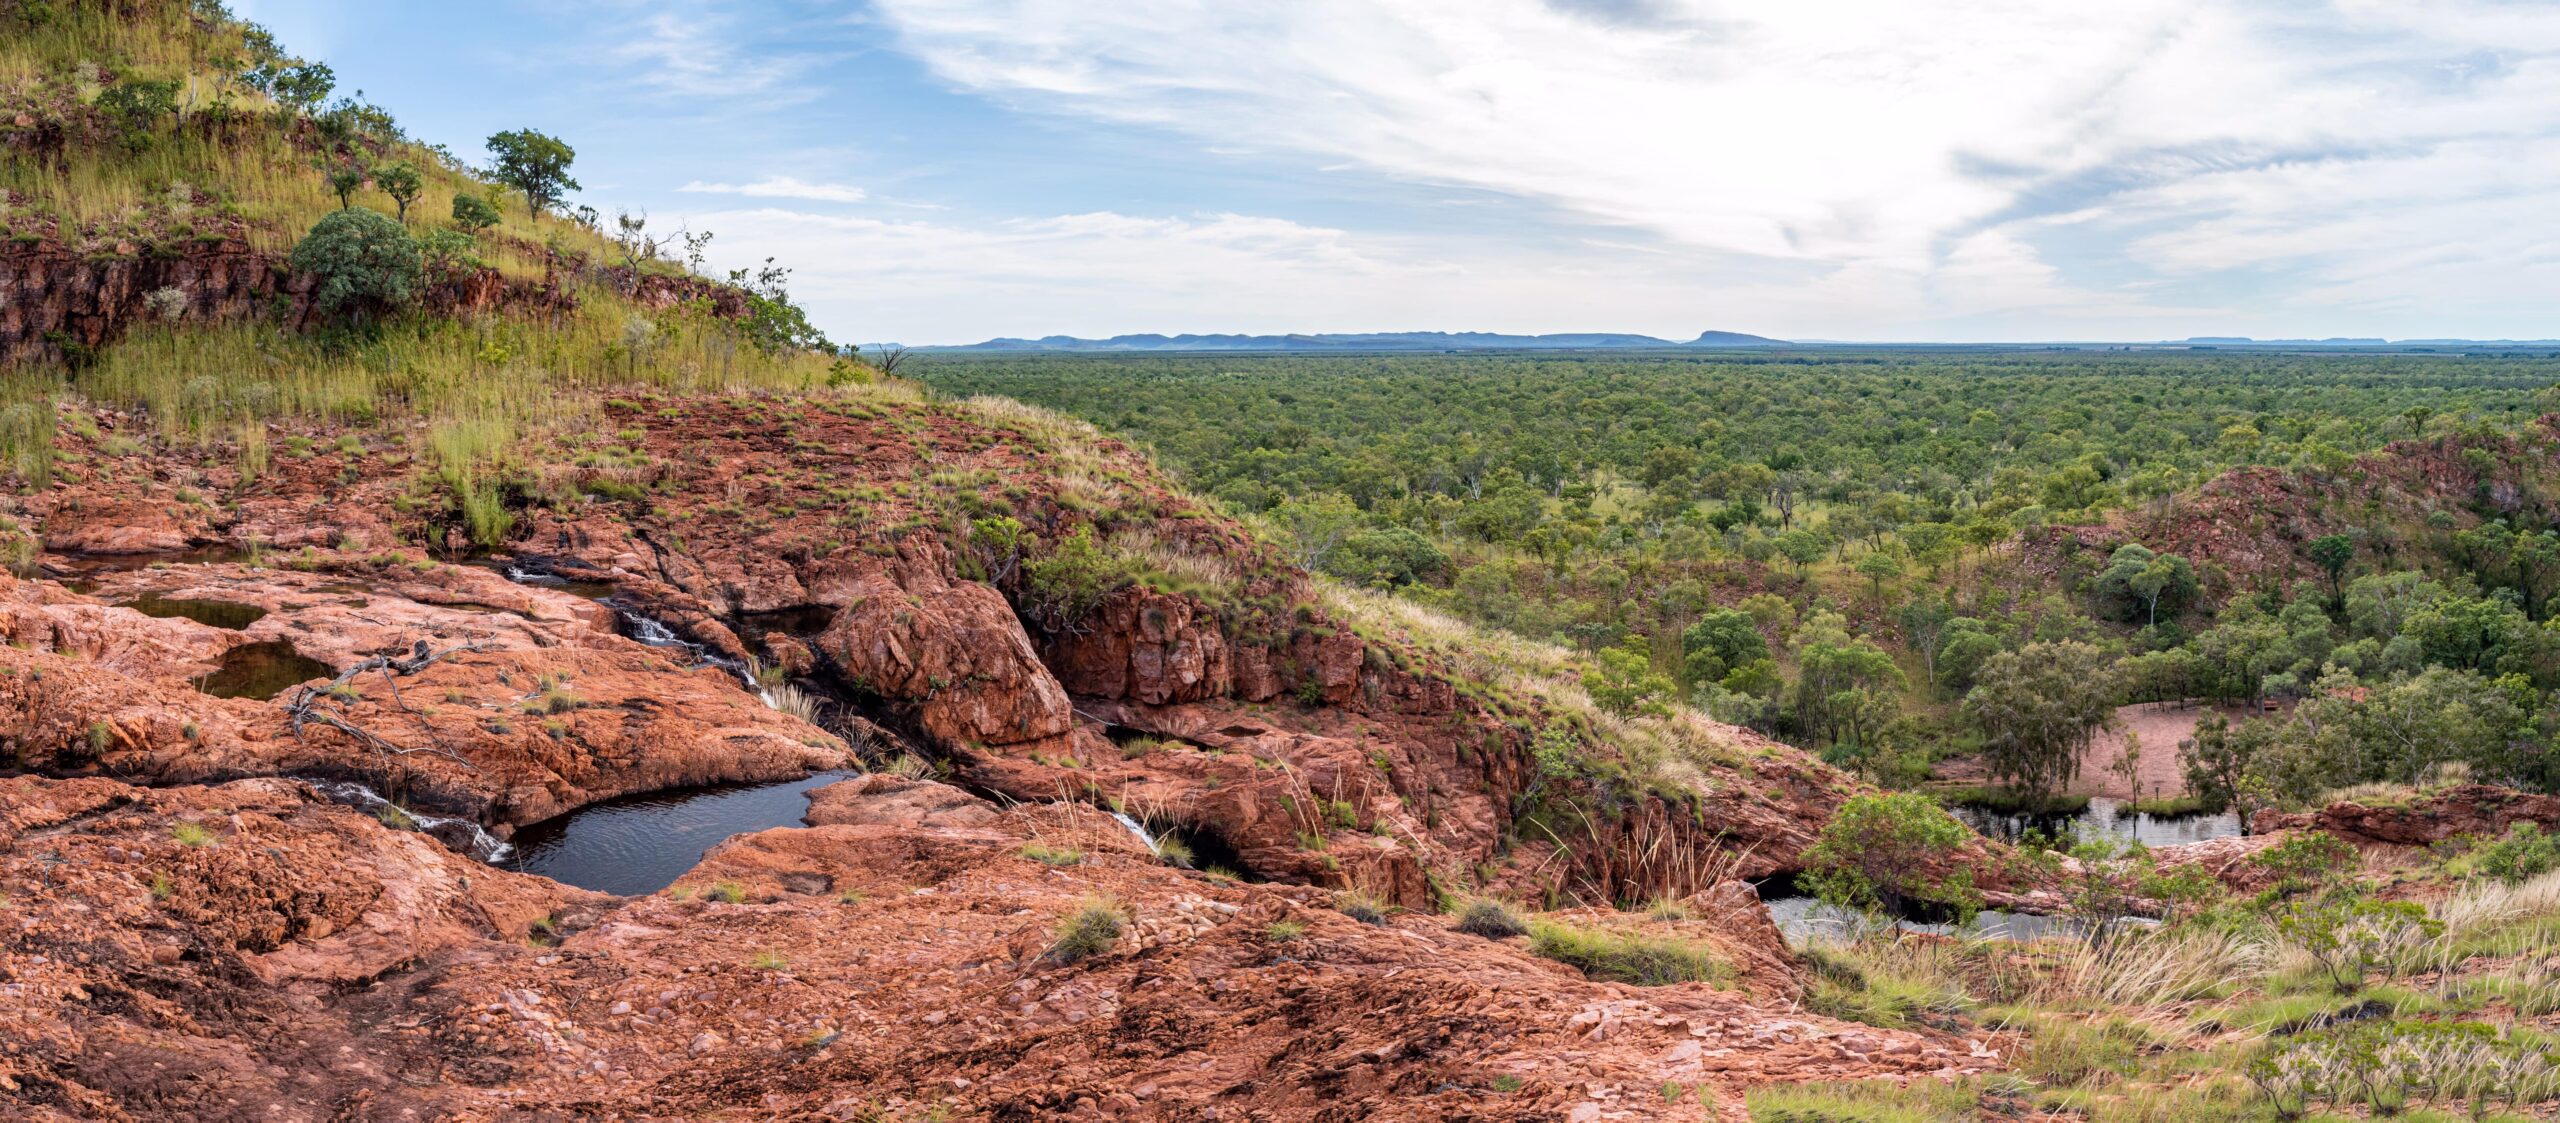 A Wanderer’s Guide to: Kununurra and Lake Argyle